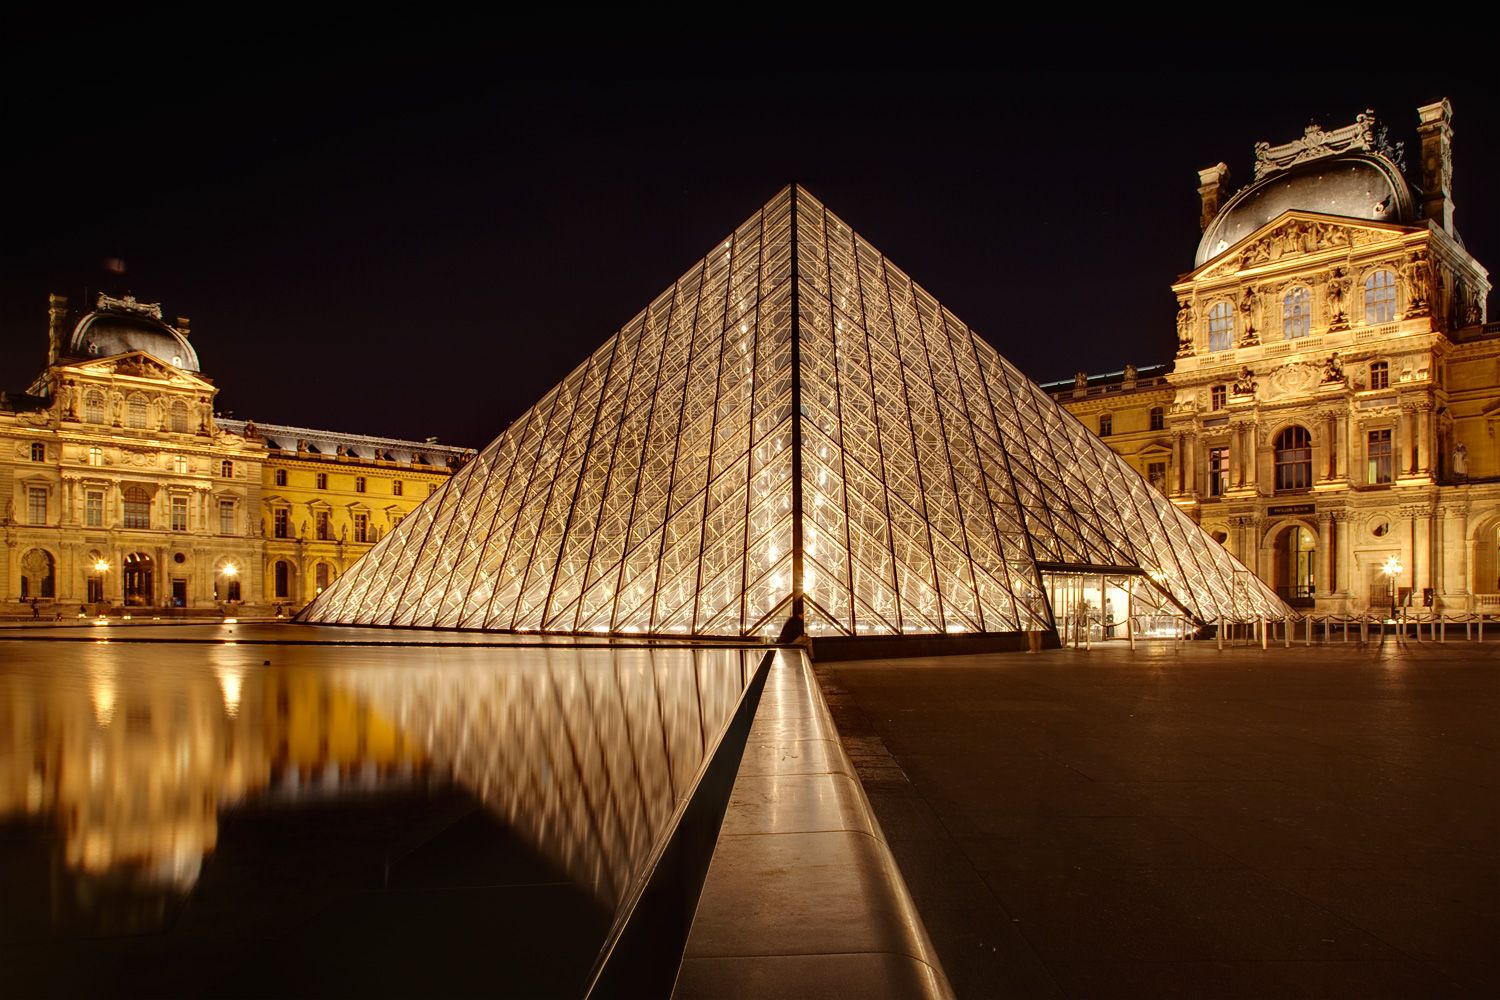 The Louvre wallpaper, Man Made, HQ The Louvre pictureK Wallpaper 2019